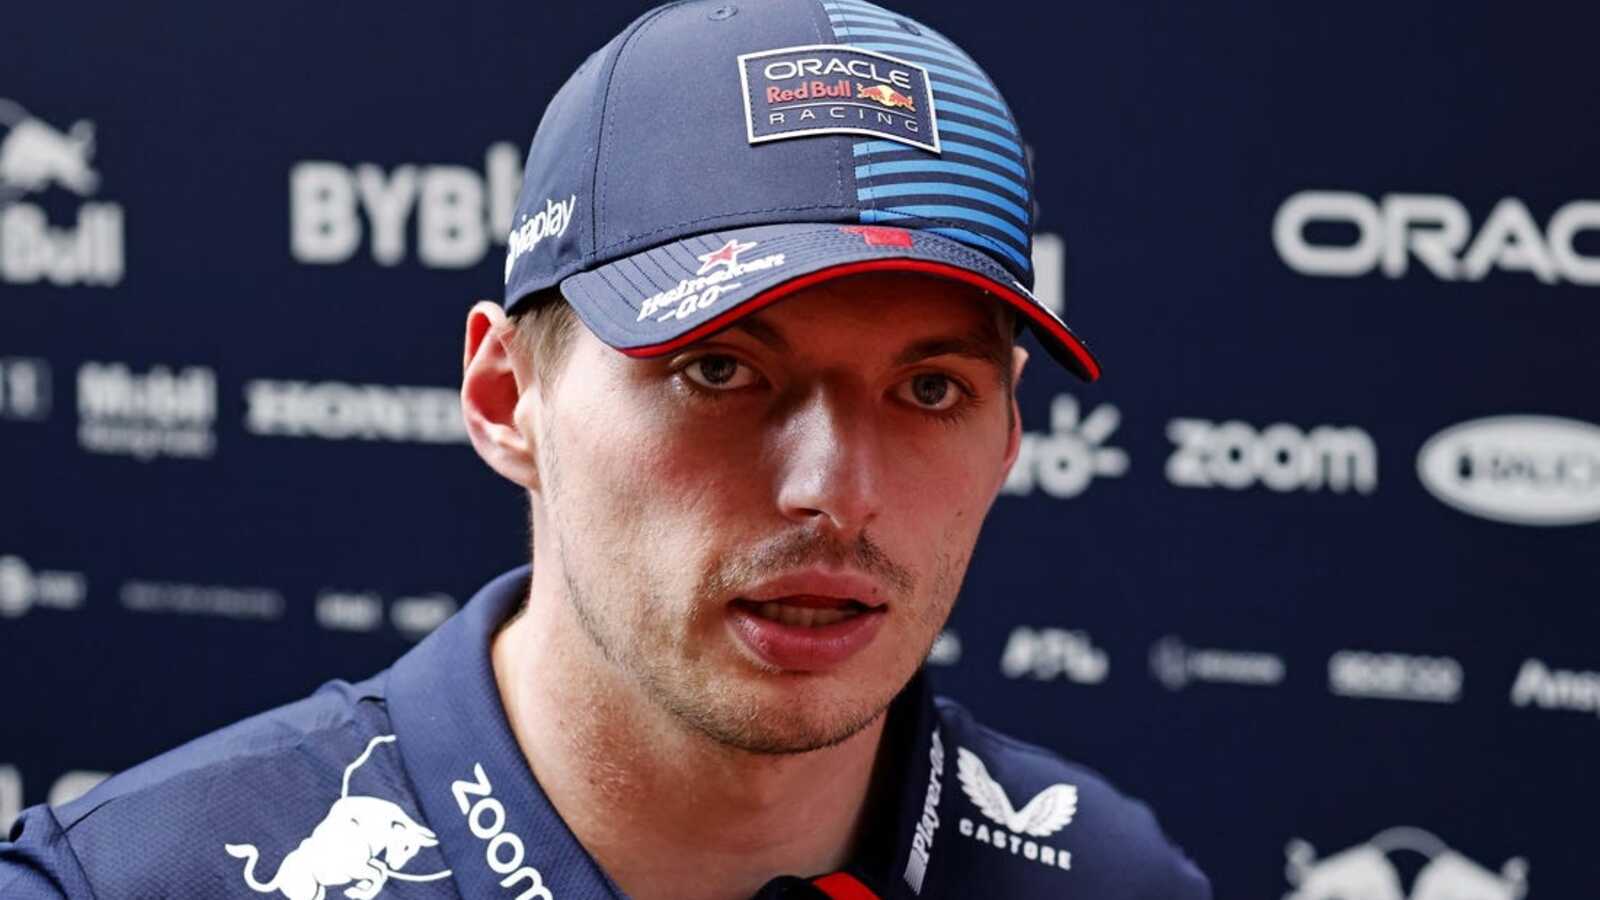 Max Verstappen says Adrian Newey Red Bull exit overblown